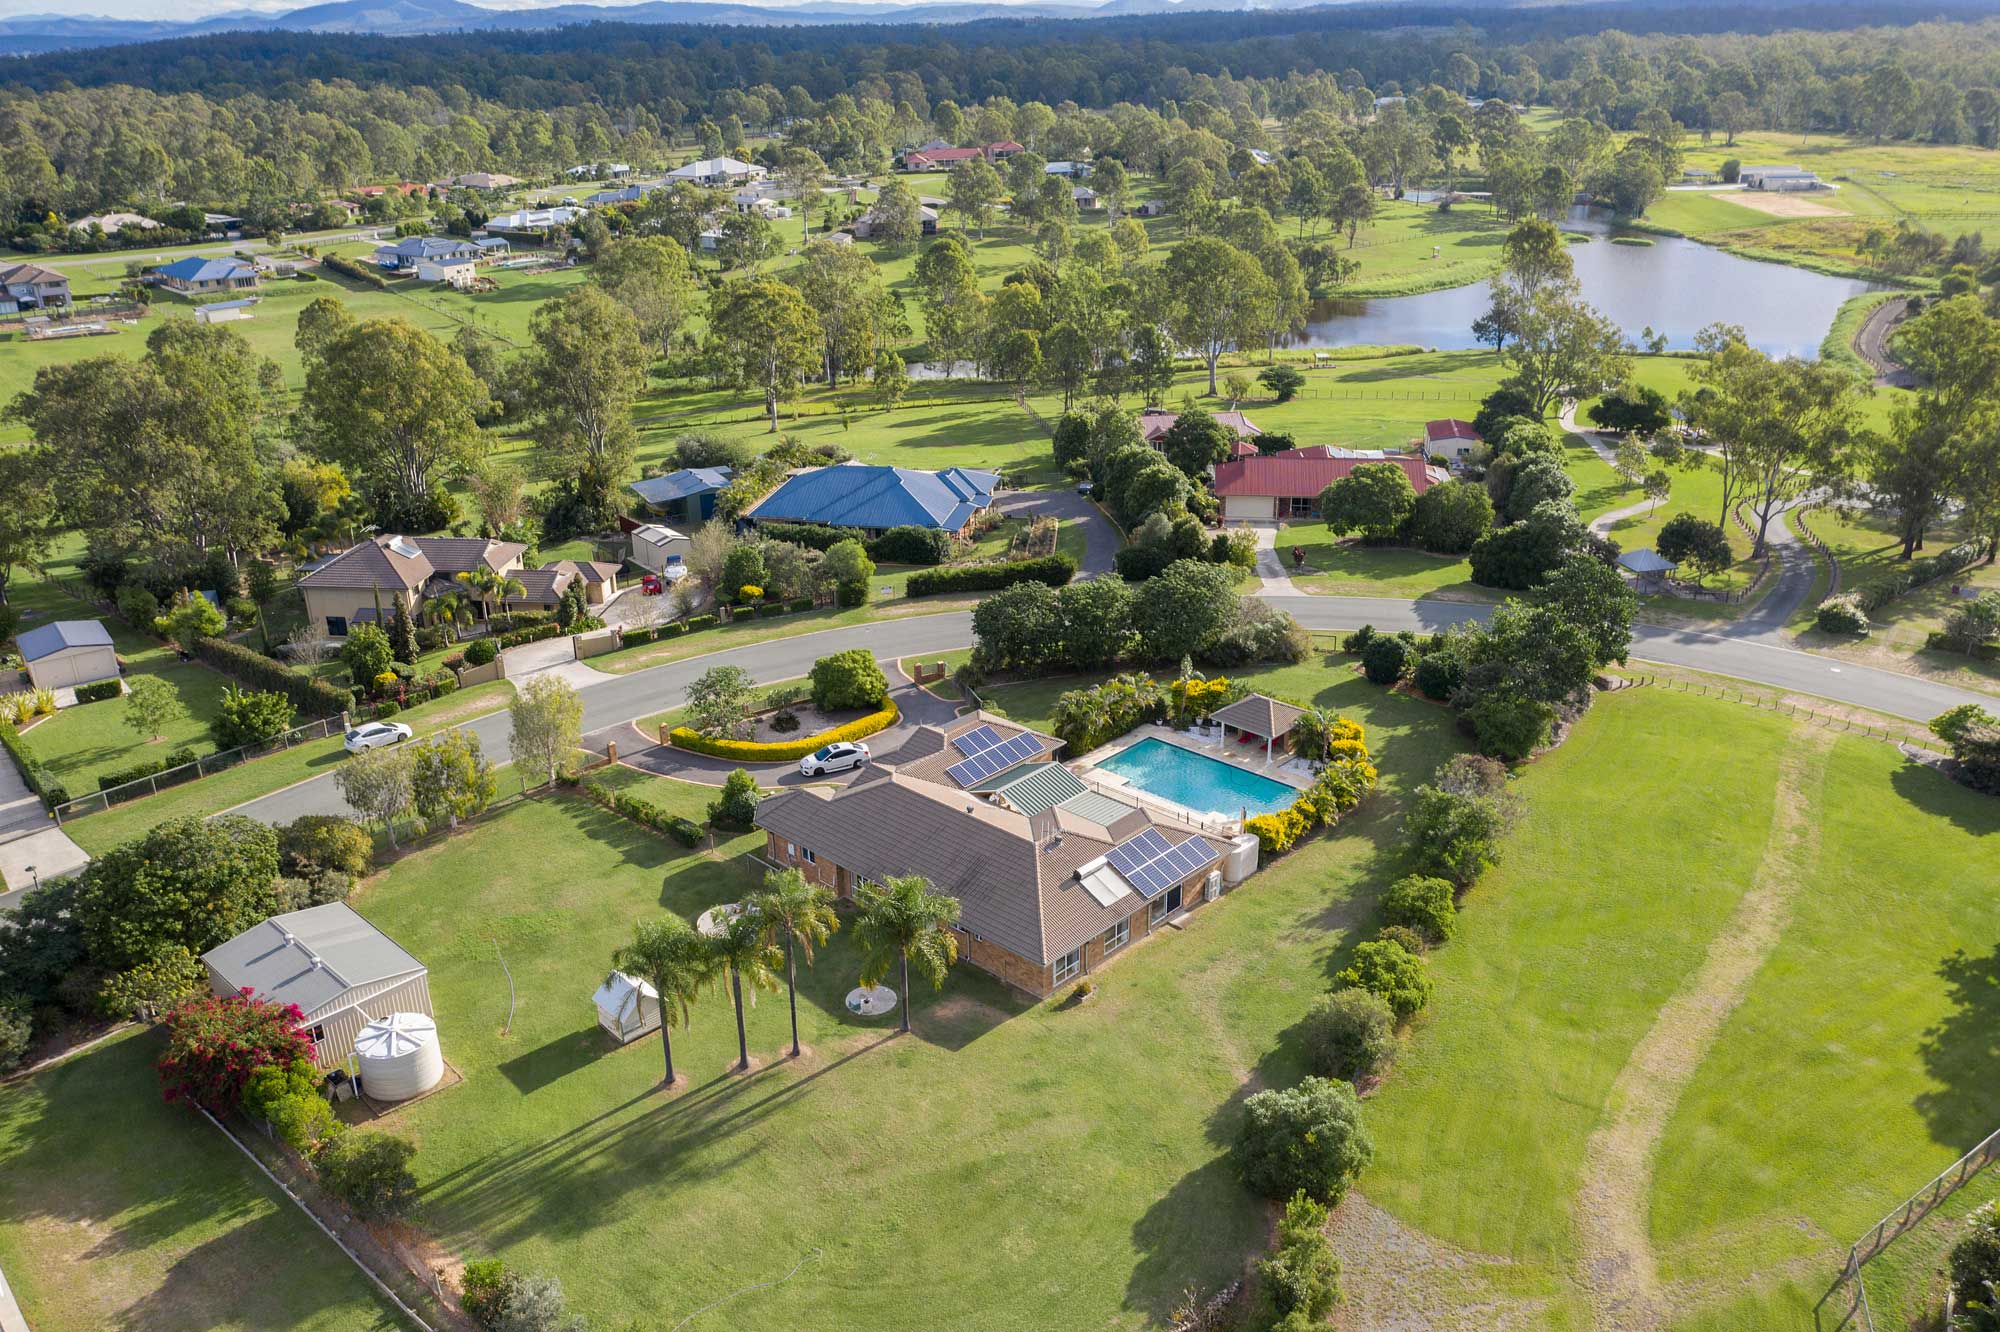 Capturing the surrounds  - 80 St Jude Circuit - Drones for marketing acreage real estate listings